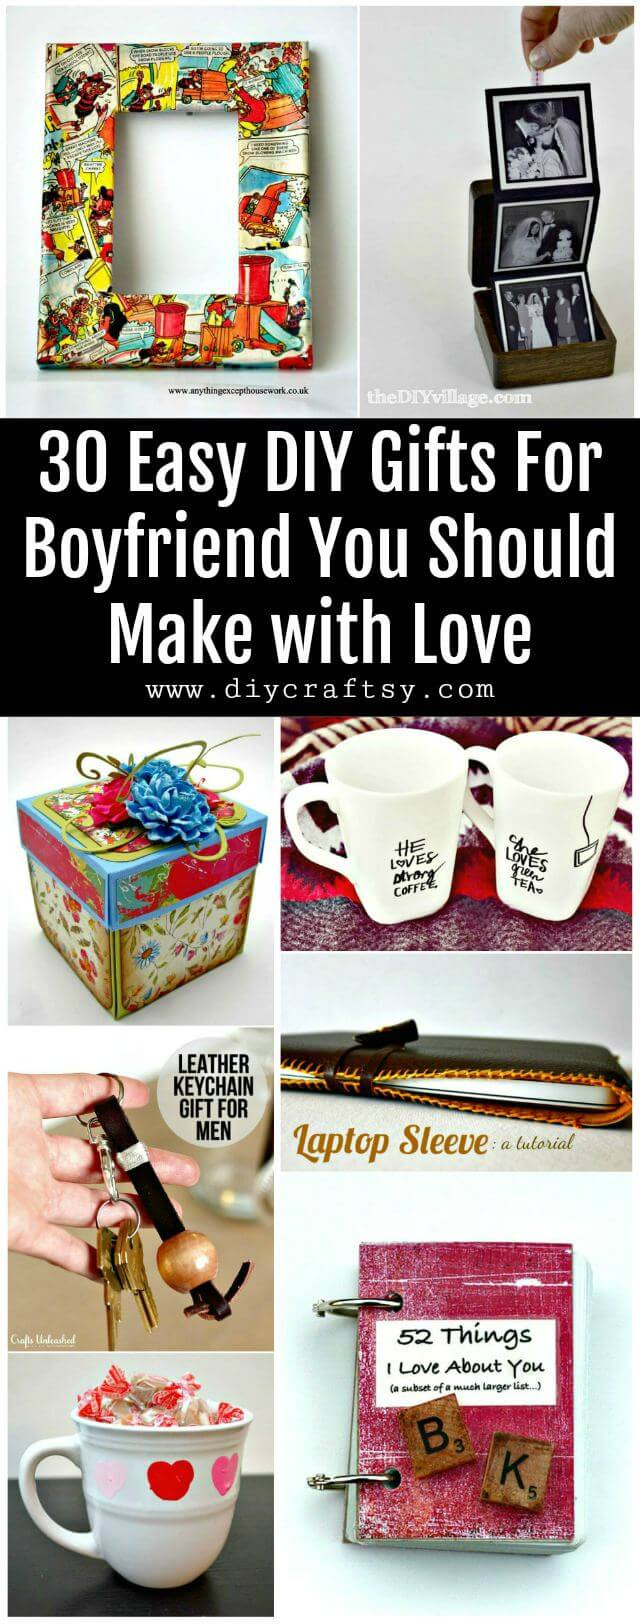 I Love You Gift Ideas For Girlfriend
 Interior Homemade Craft Gifts For Girlfriend Car Design